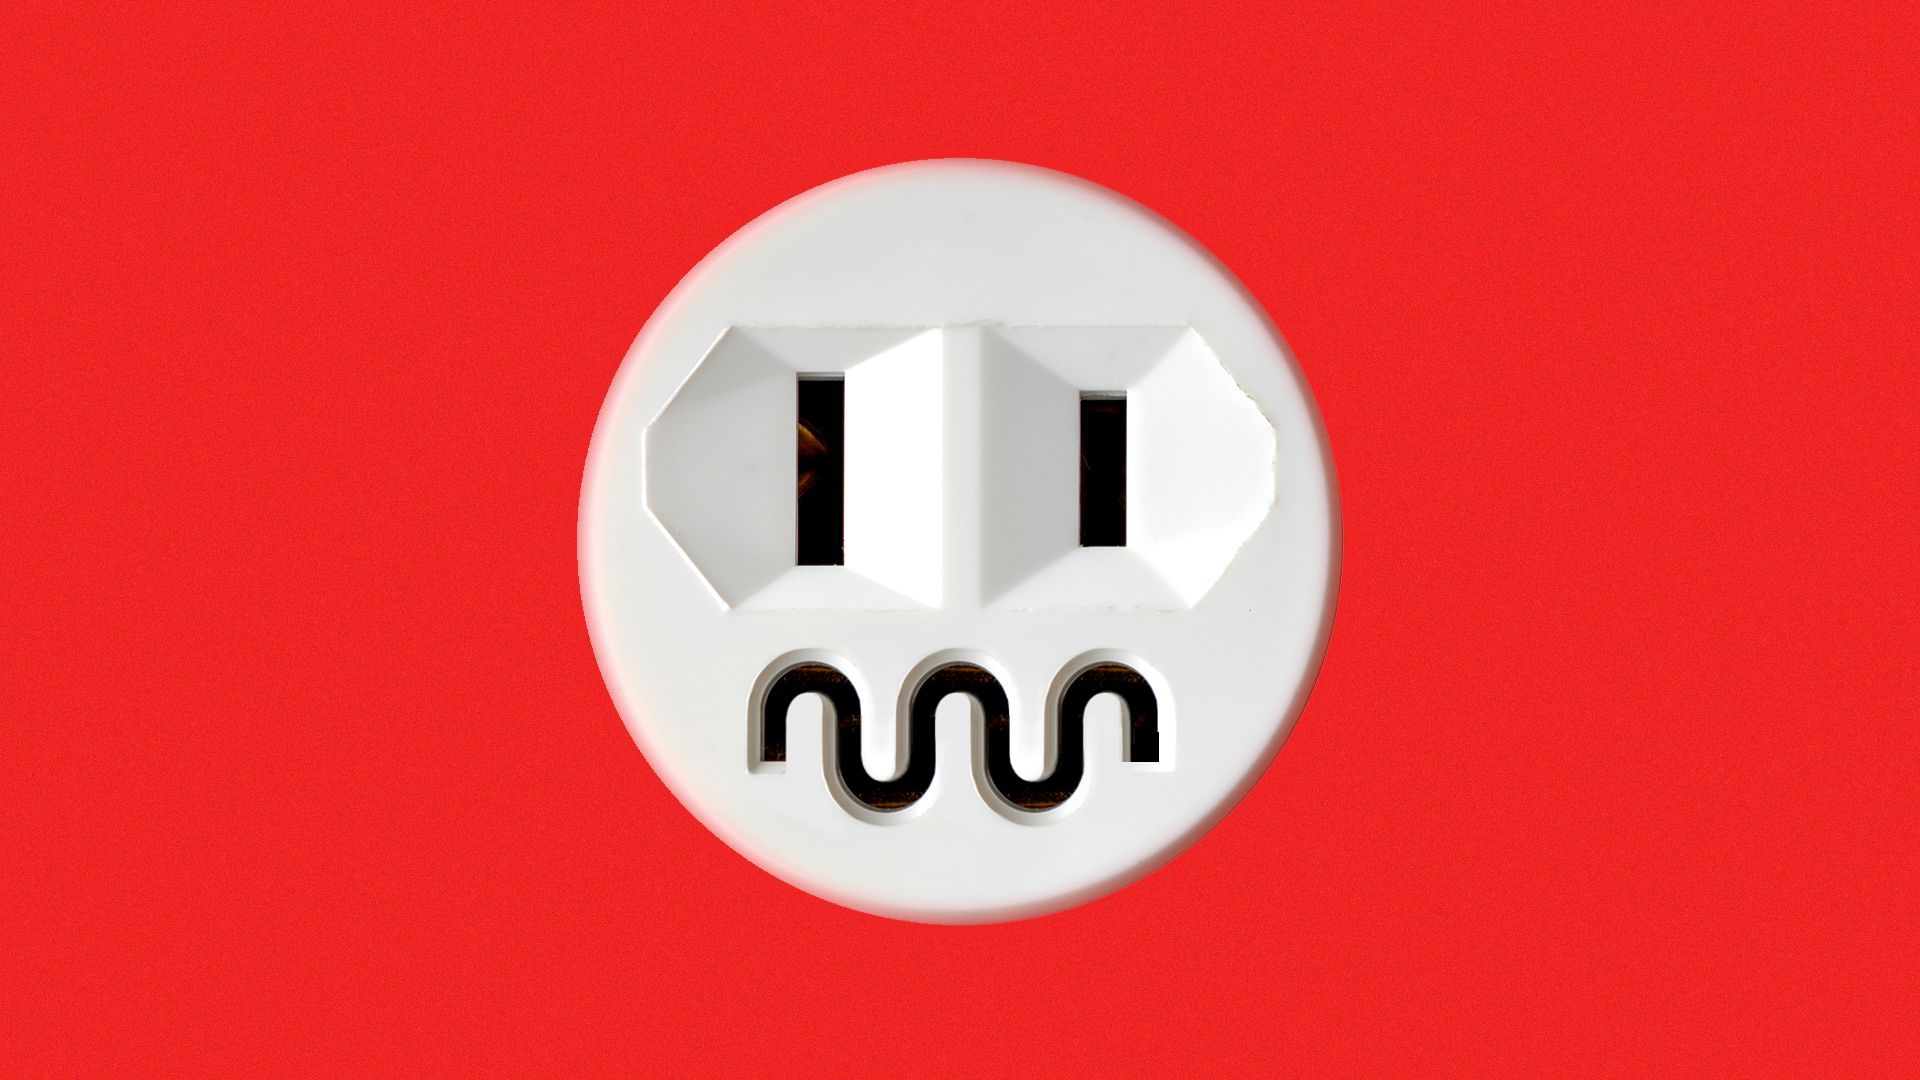 Illustration of an outlet making an uncertain face